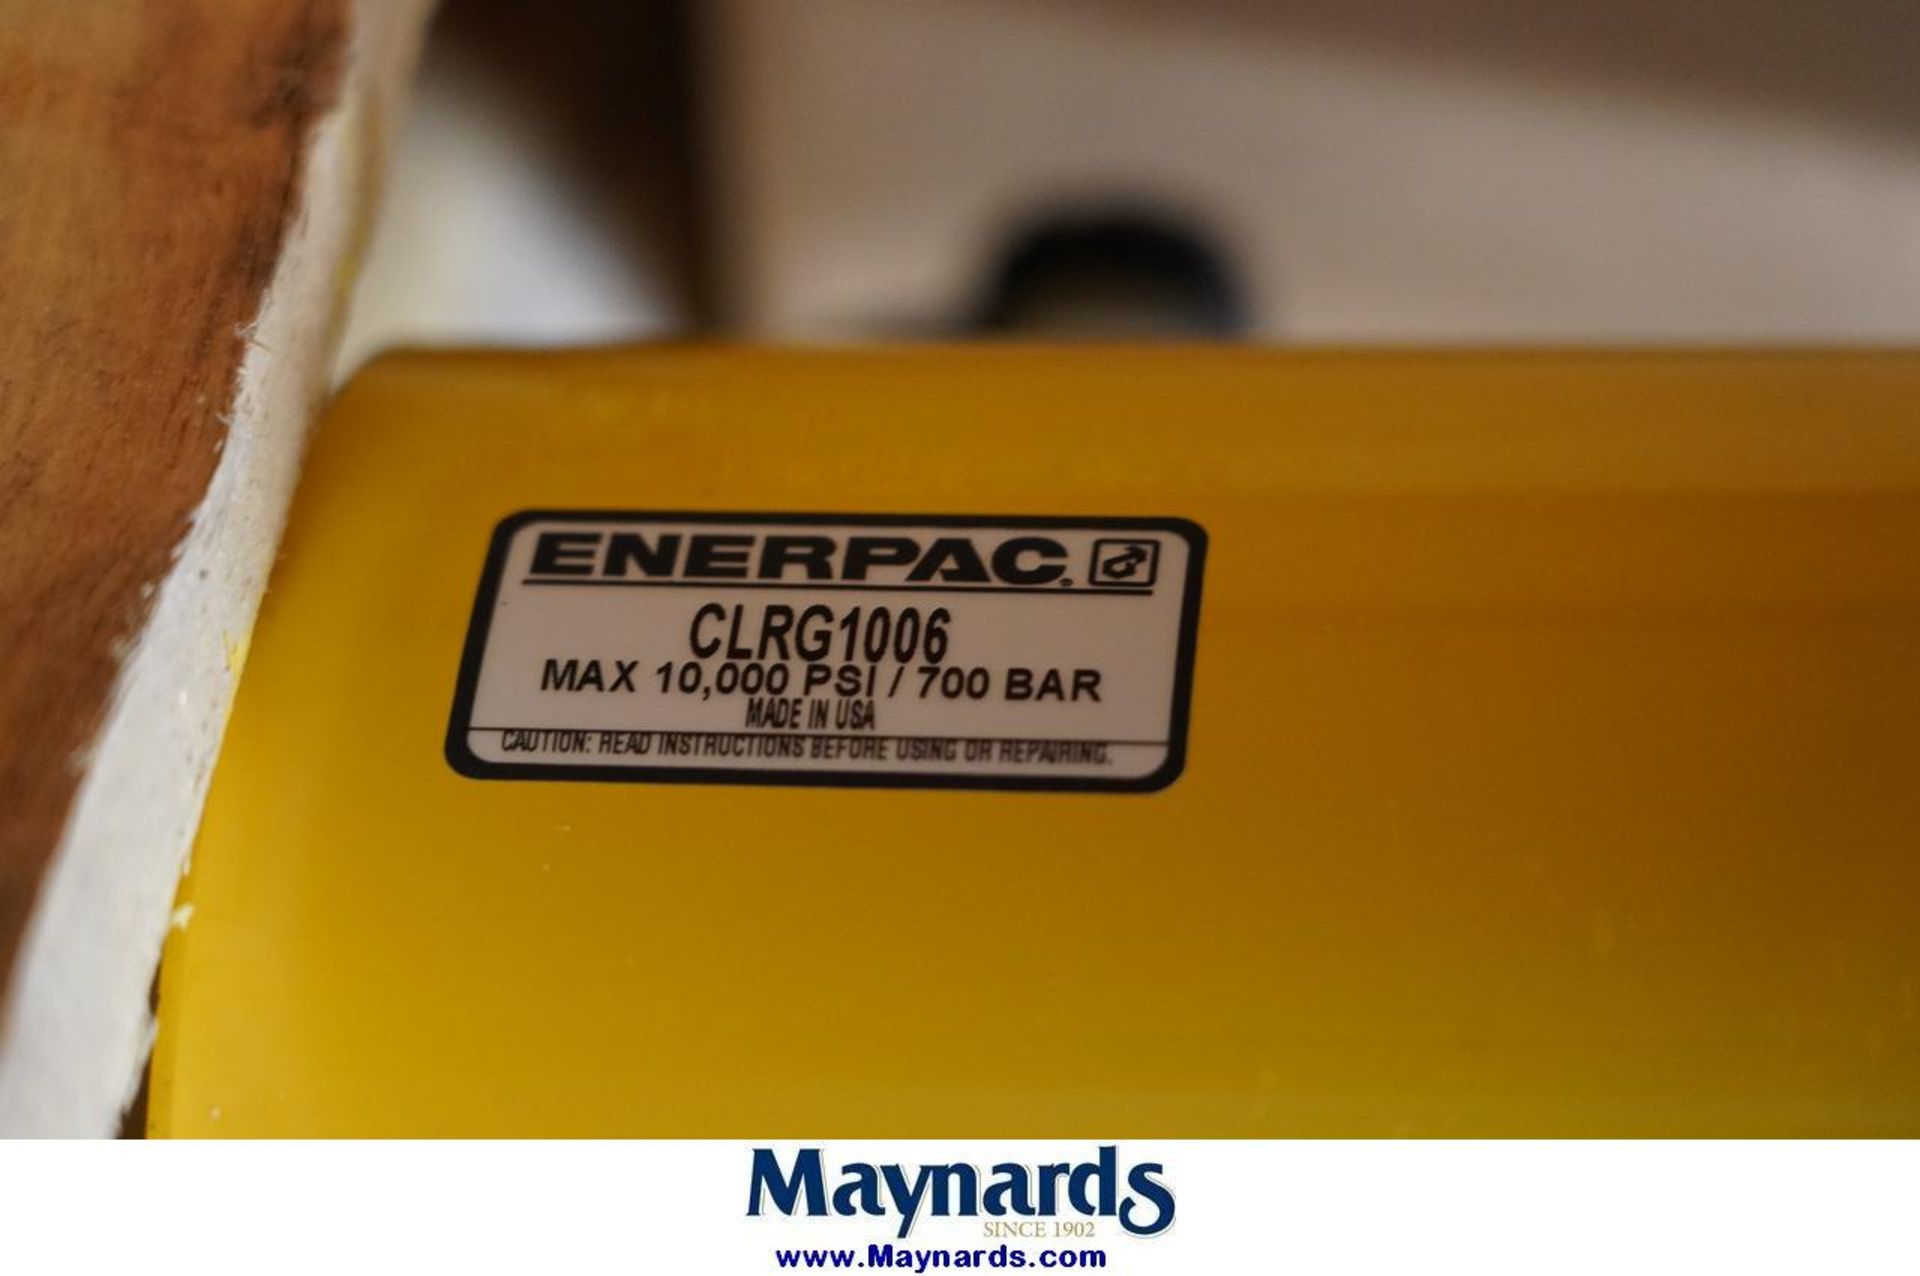 Enerpac CLRG1006 100 Ton Hydraulic Cylinder - Double Acting - High Tonnage - Image 3 of 4